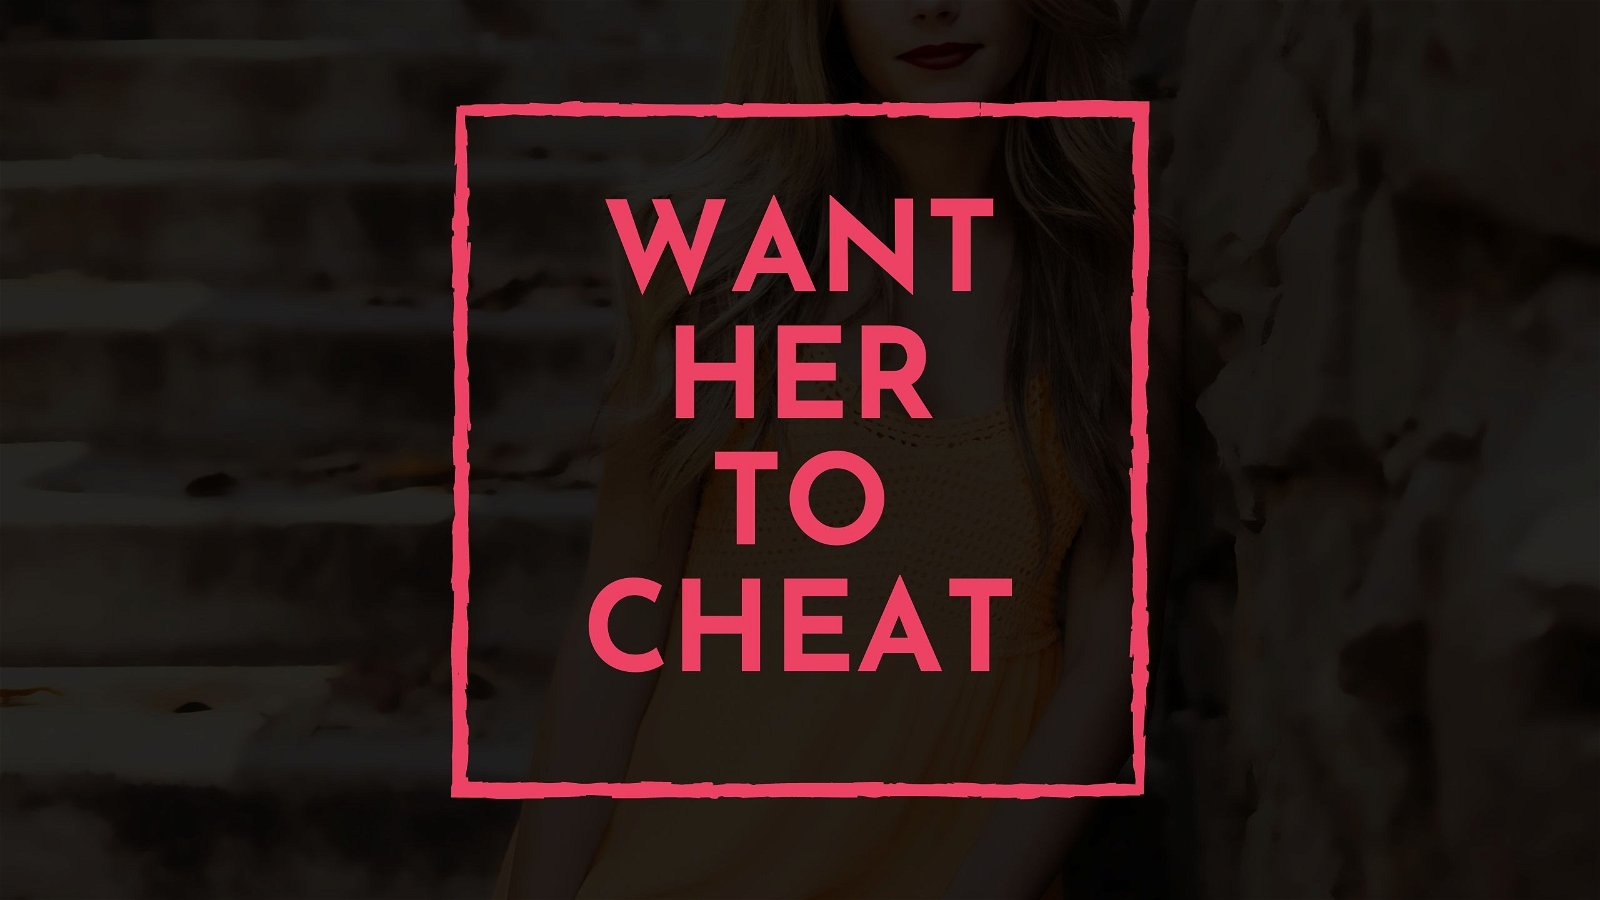 Photo by wanthertocheat with the username @wanthertocheat,  August 9, 2020 at 4:16 AM and the text says 'Want Her to Cheat <https://wanthertocheat.com>'